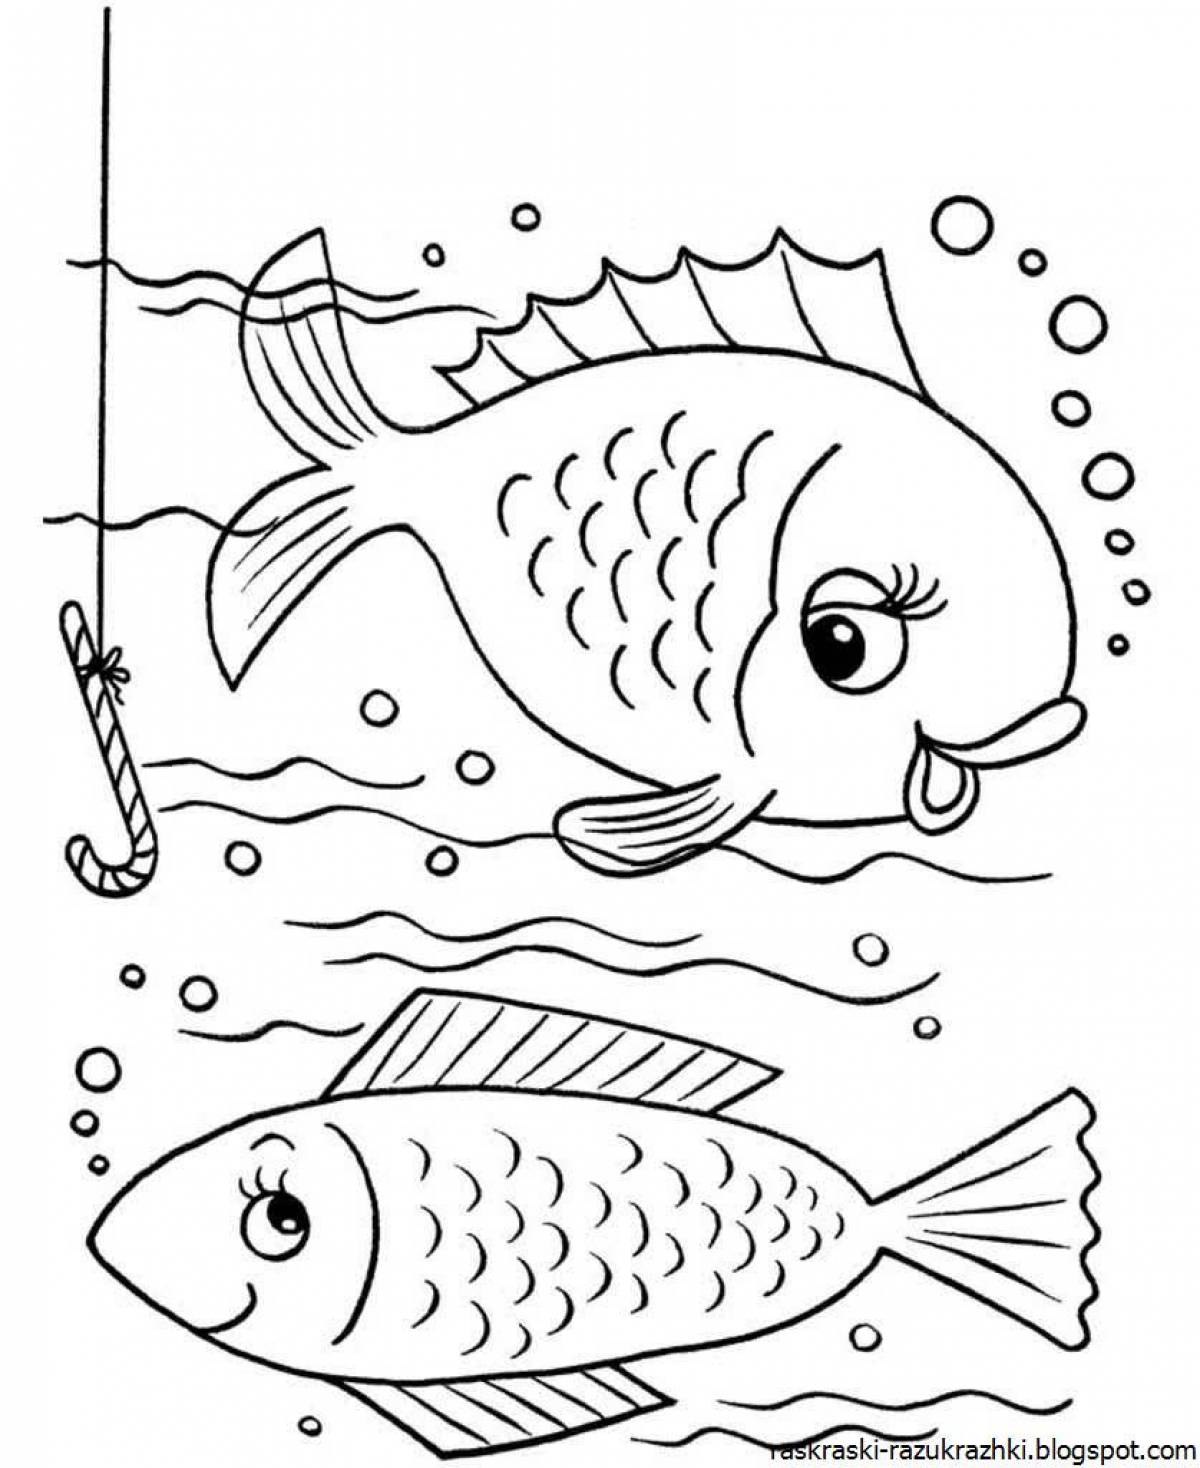 Great fish coloring book for kids